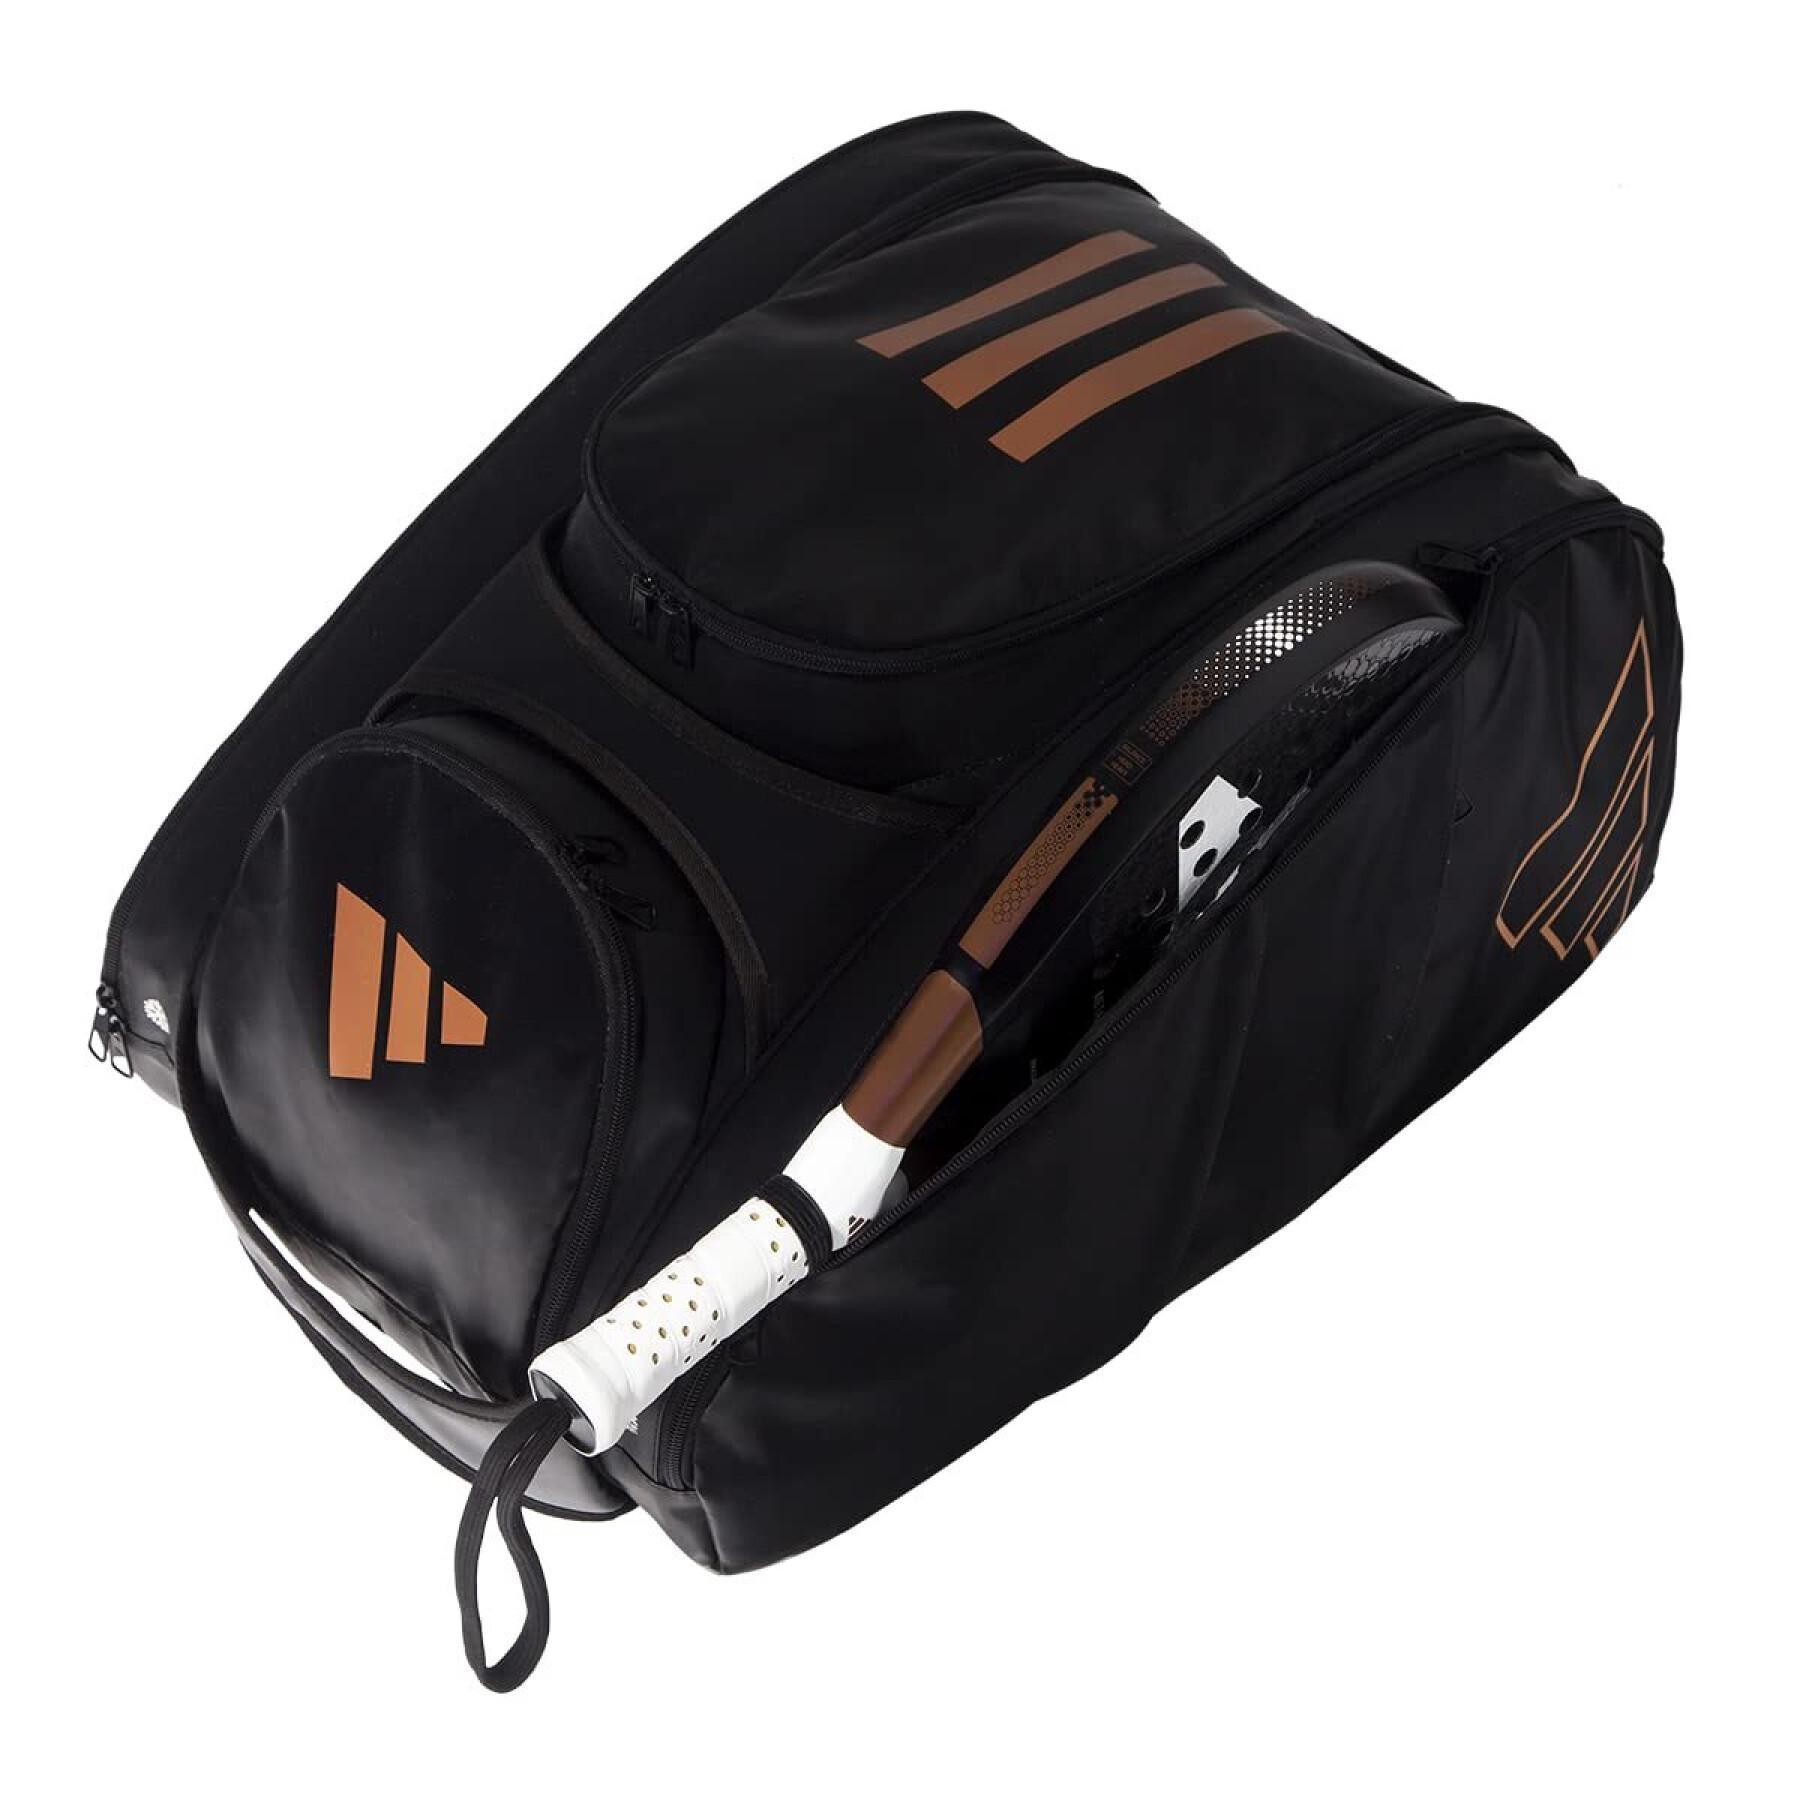 Racket bag from padel adidas Multigame 3.2